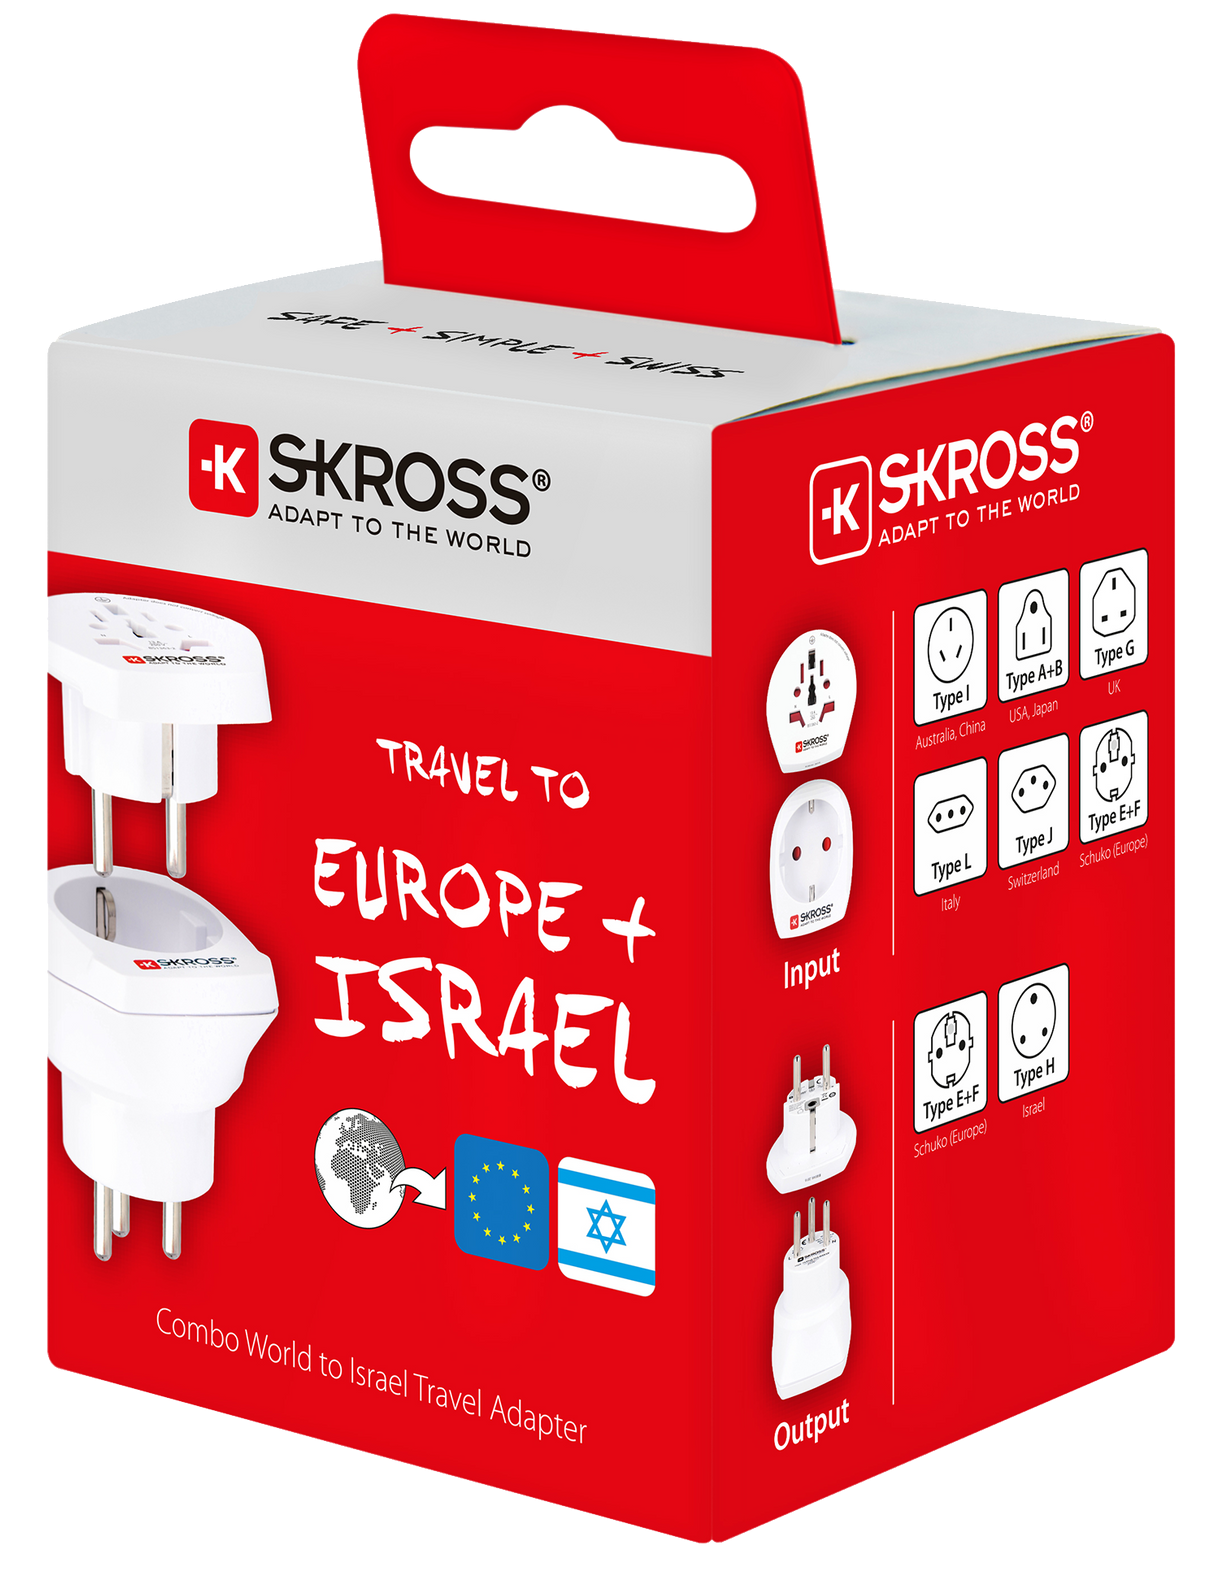 Skross 3-Pole Combo World to Israel Travel Adapter Packaging